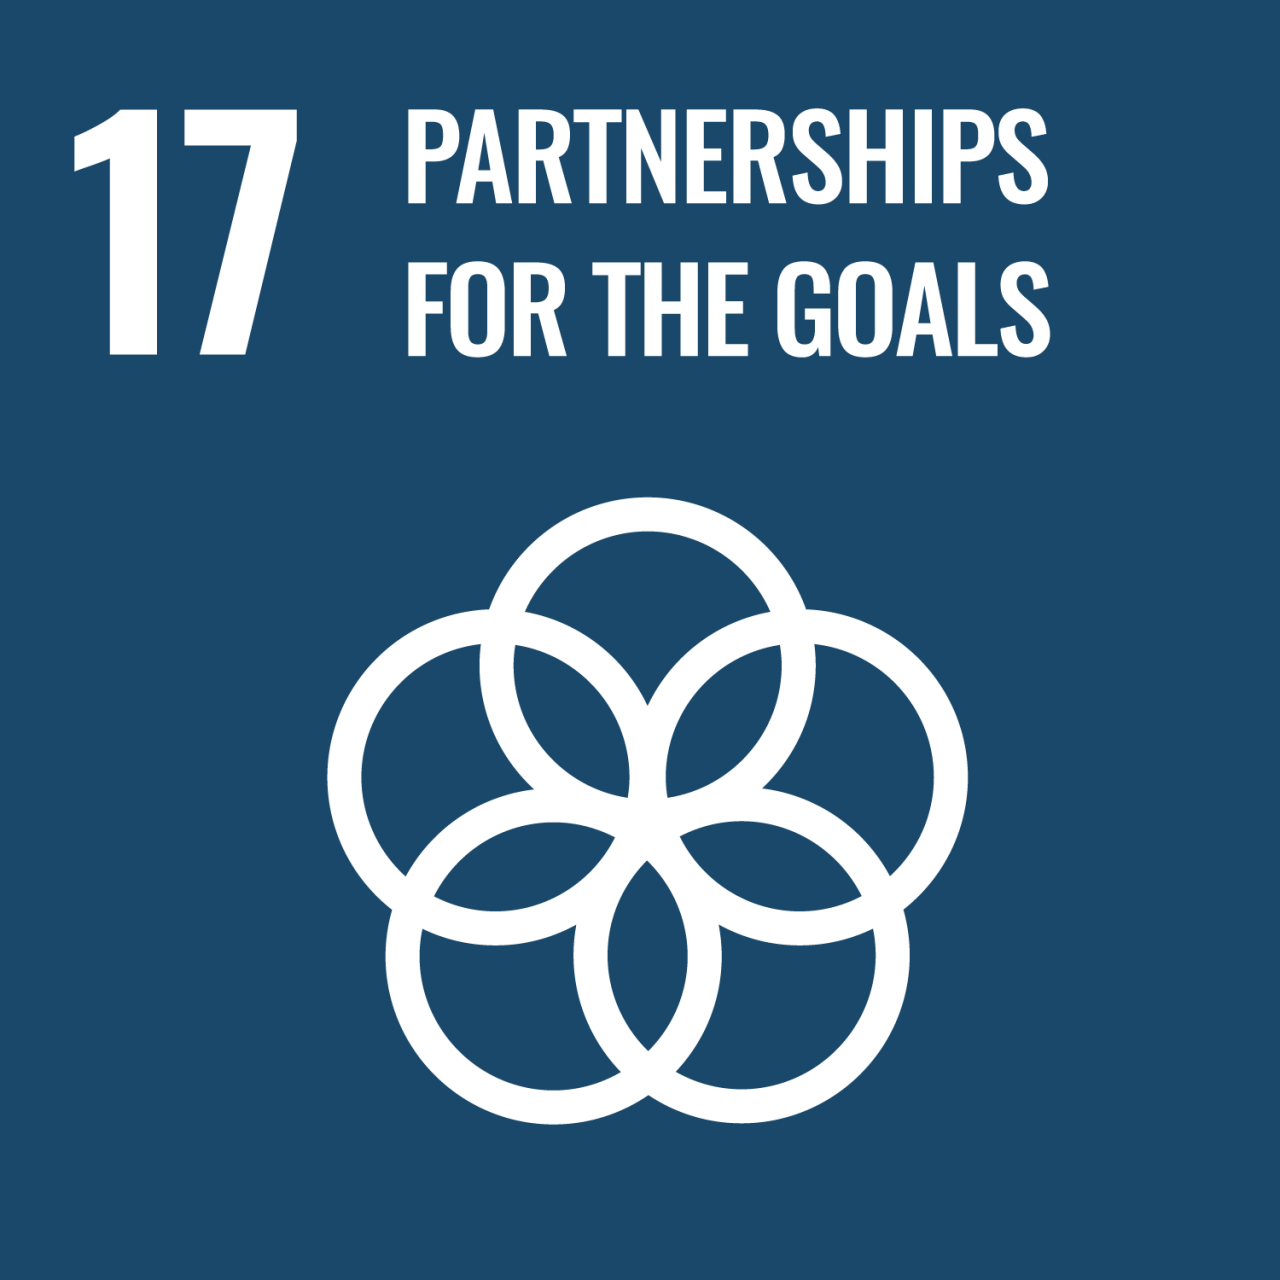 Sustainable Development Goal 17 relates to partnerships. UC supports the SDGs as a globally-agreed roadmap to a more peaceful and sustainable world.